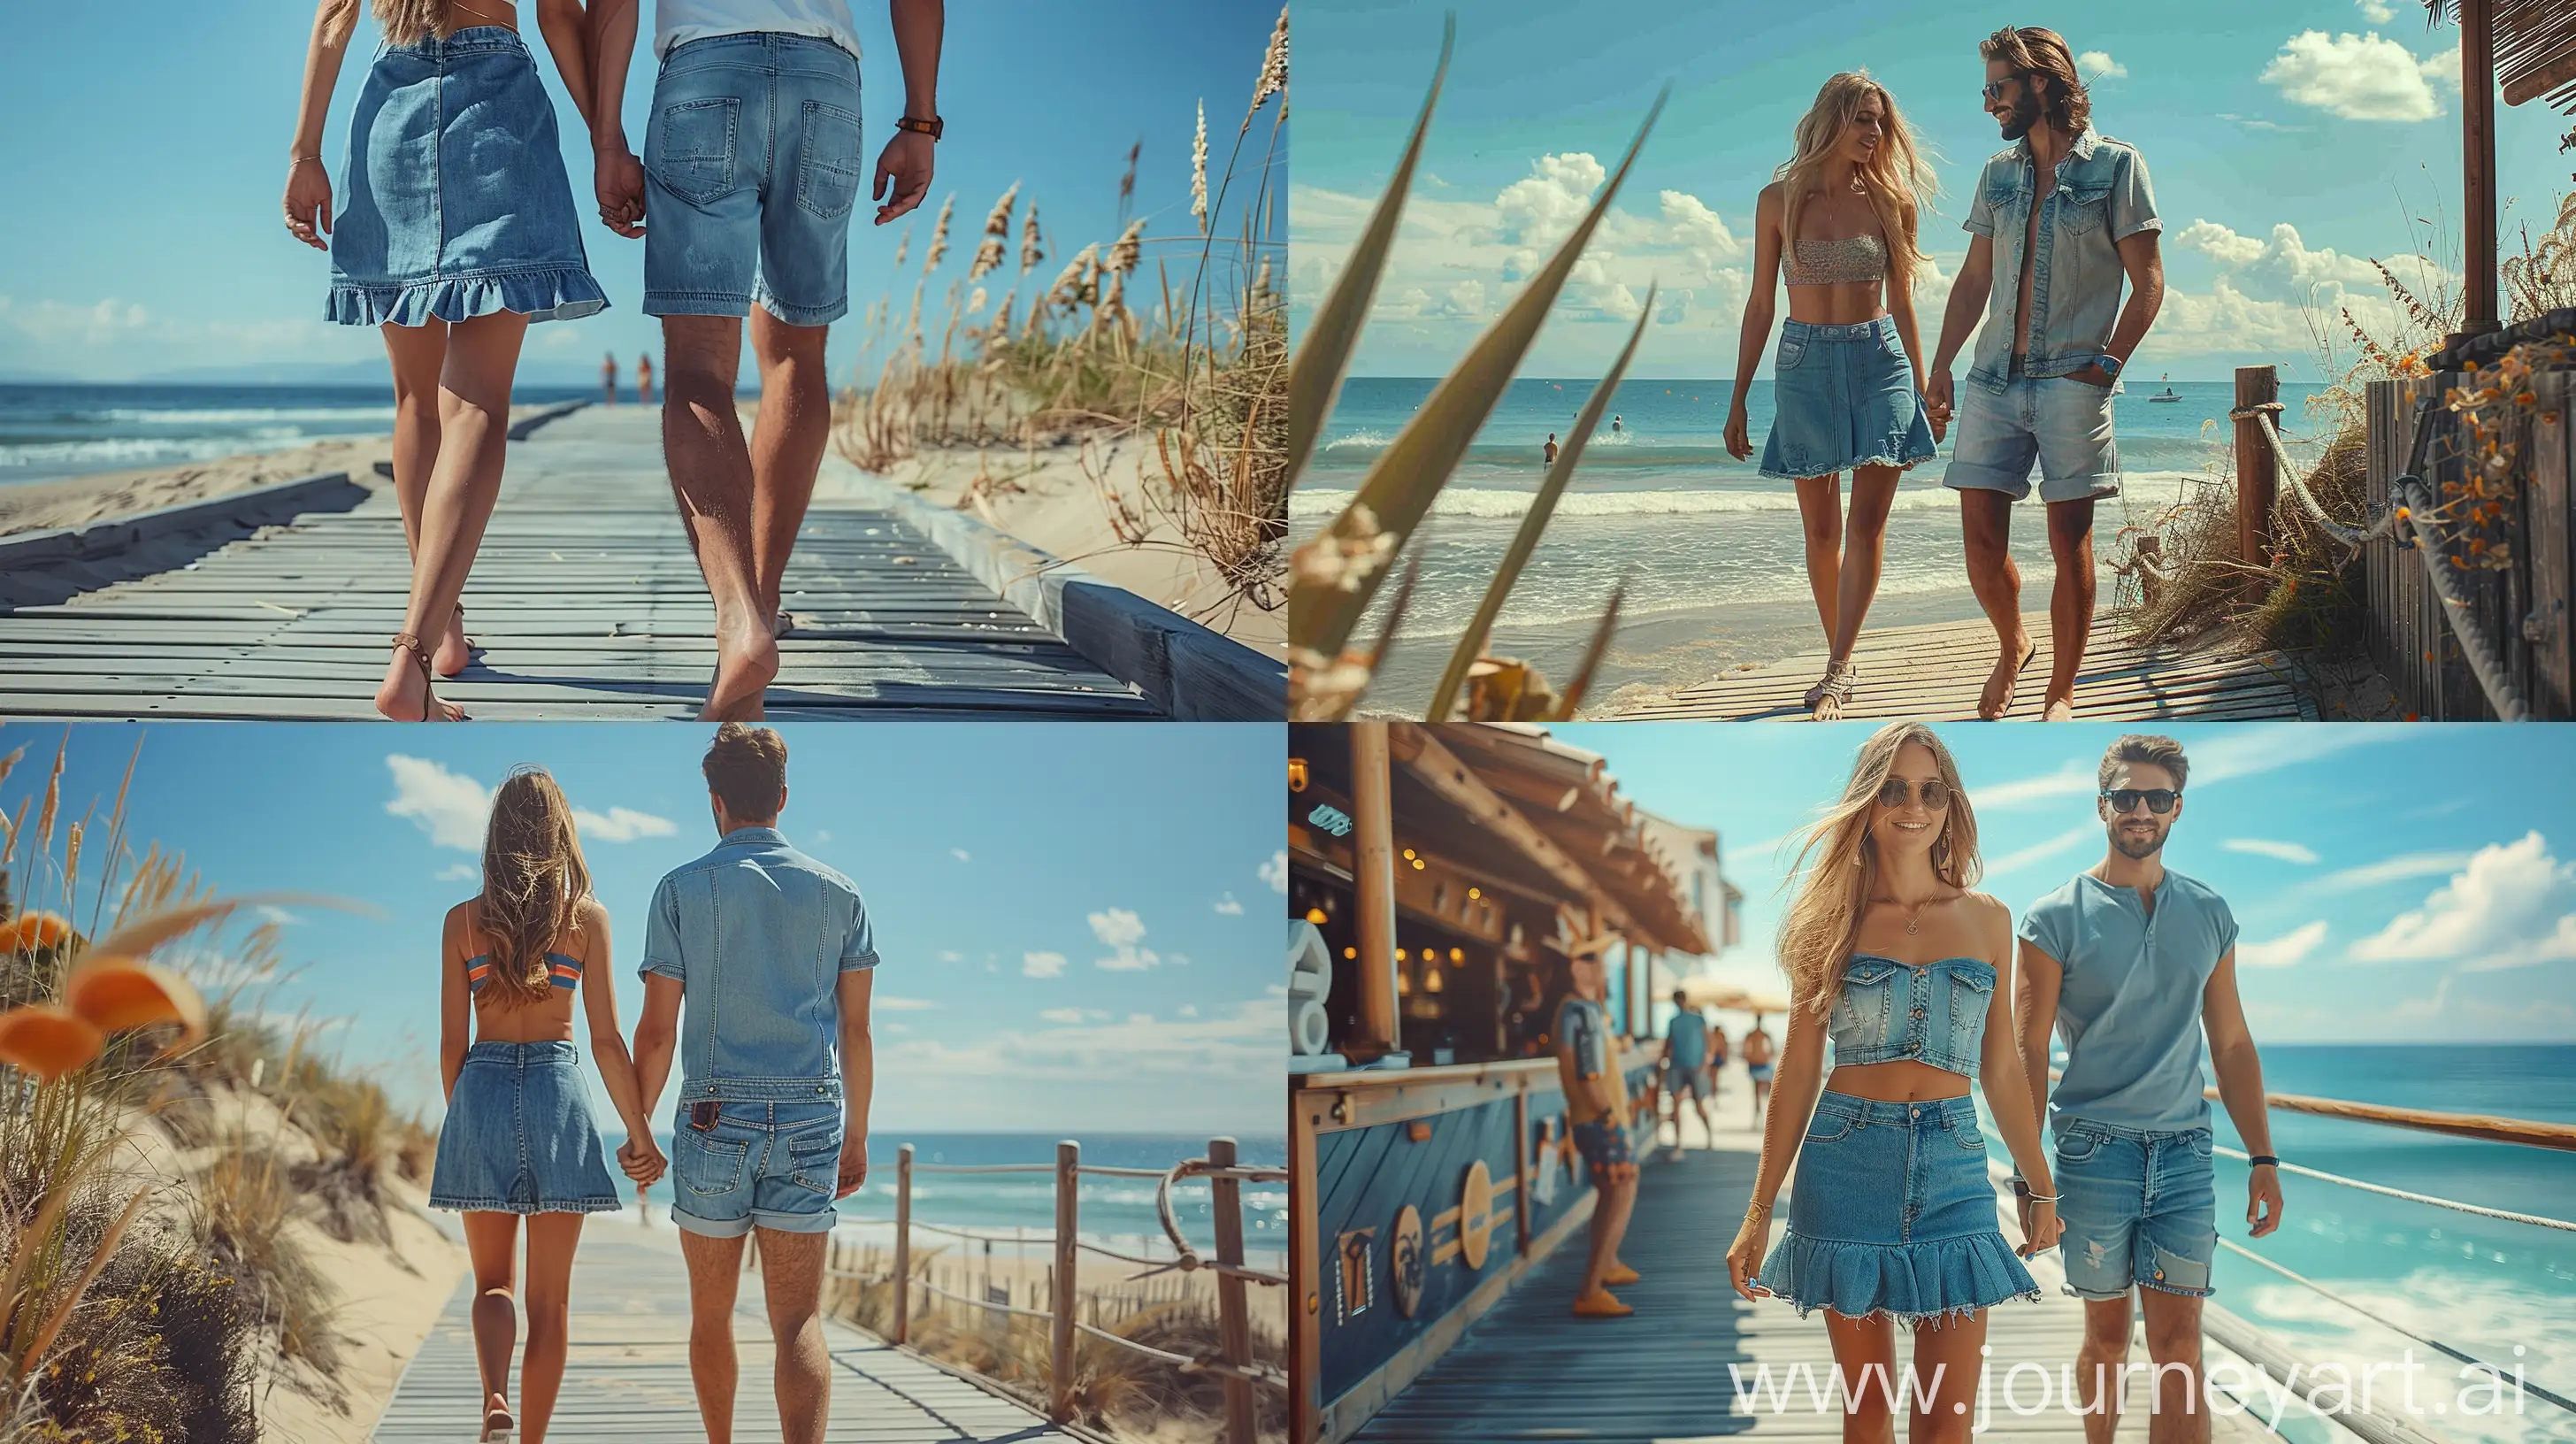 An image of a woman and a man strolling on a beach boardwalk, the woman in a denim skirt and the man in denim shorts, both showcasing relaxed summer fashion with a sea backdrop. --stylize 300 --ar 16:9 --style raw